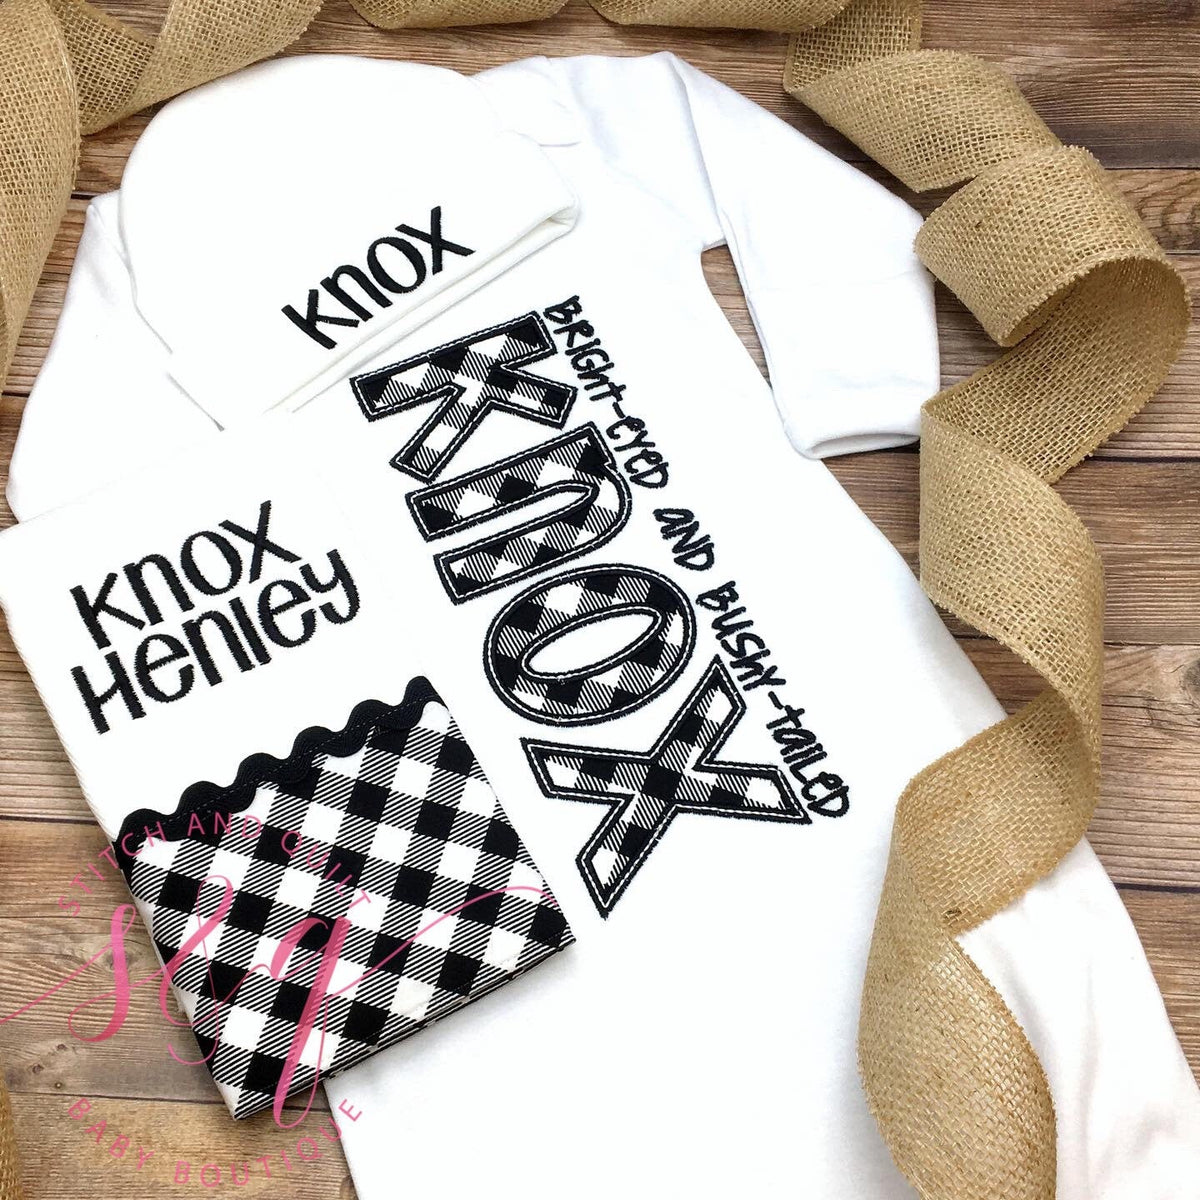 Newborn boy coming home outfit baby, Baby boy coming home outfit, Black and white plaid